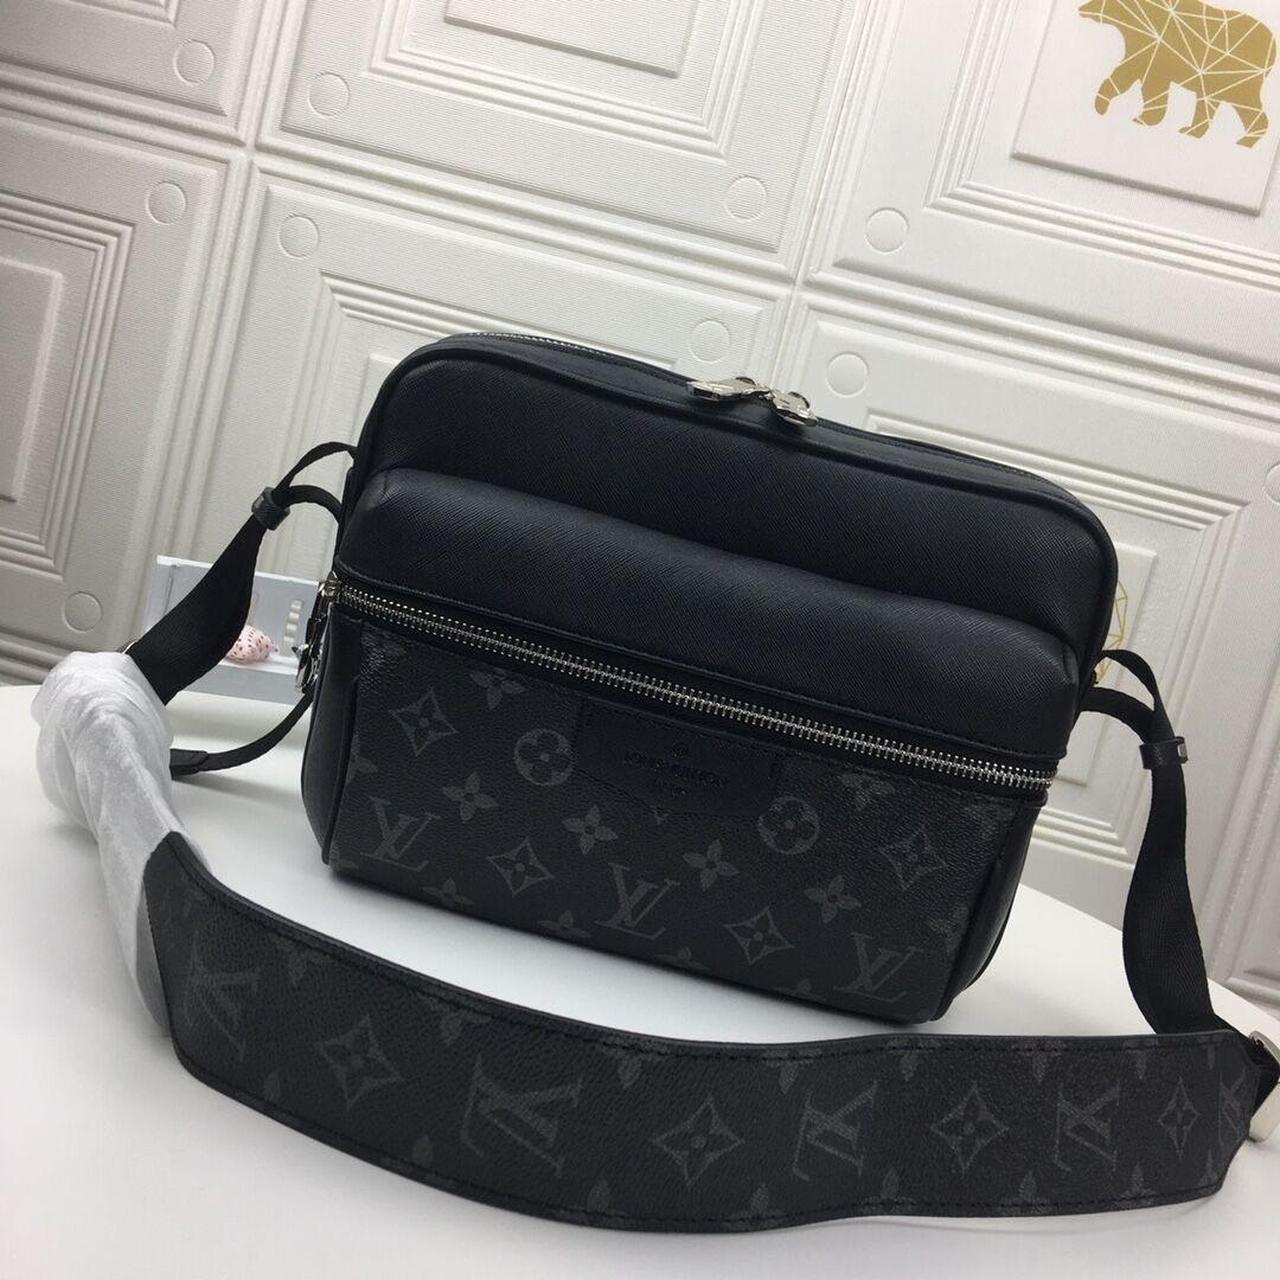 Lv outdoor messenger bag. Comes with dustbag gift... - Depop